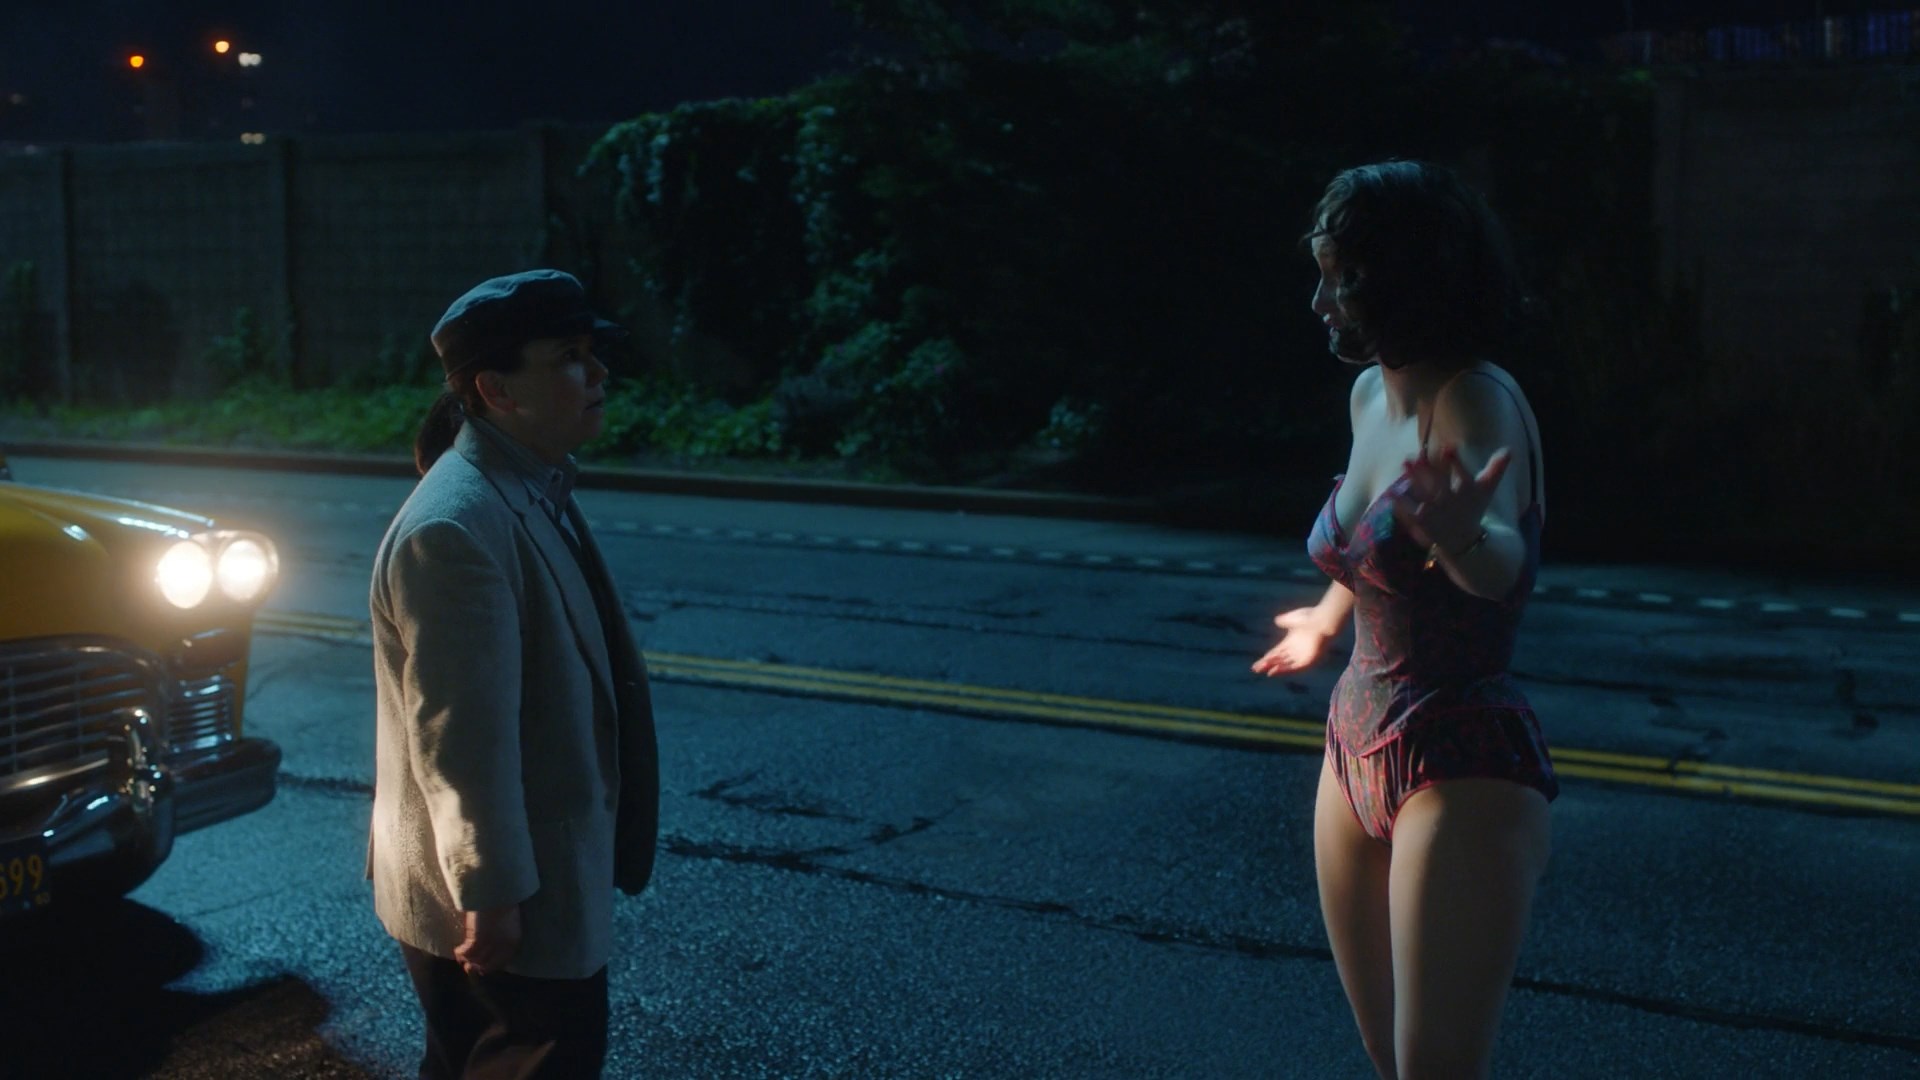 Ms. maisel nude - 🧡 Naked Extra on The Marvelous Mrs. Maisel (2018) DC&apo...